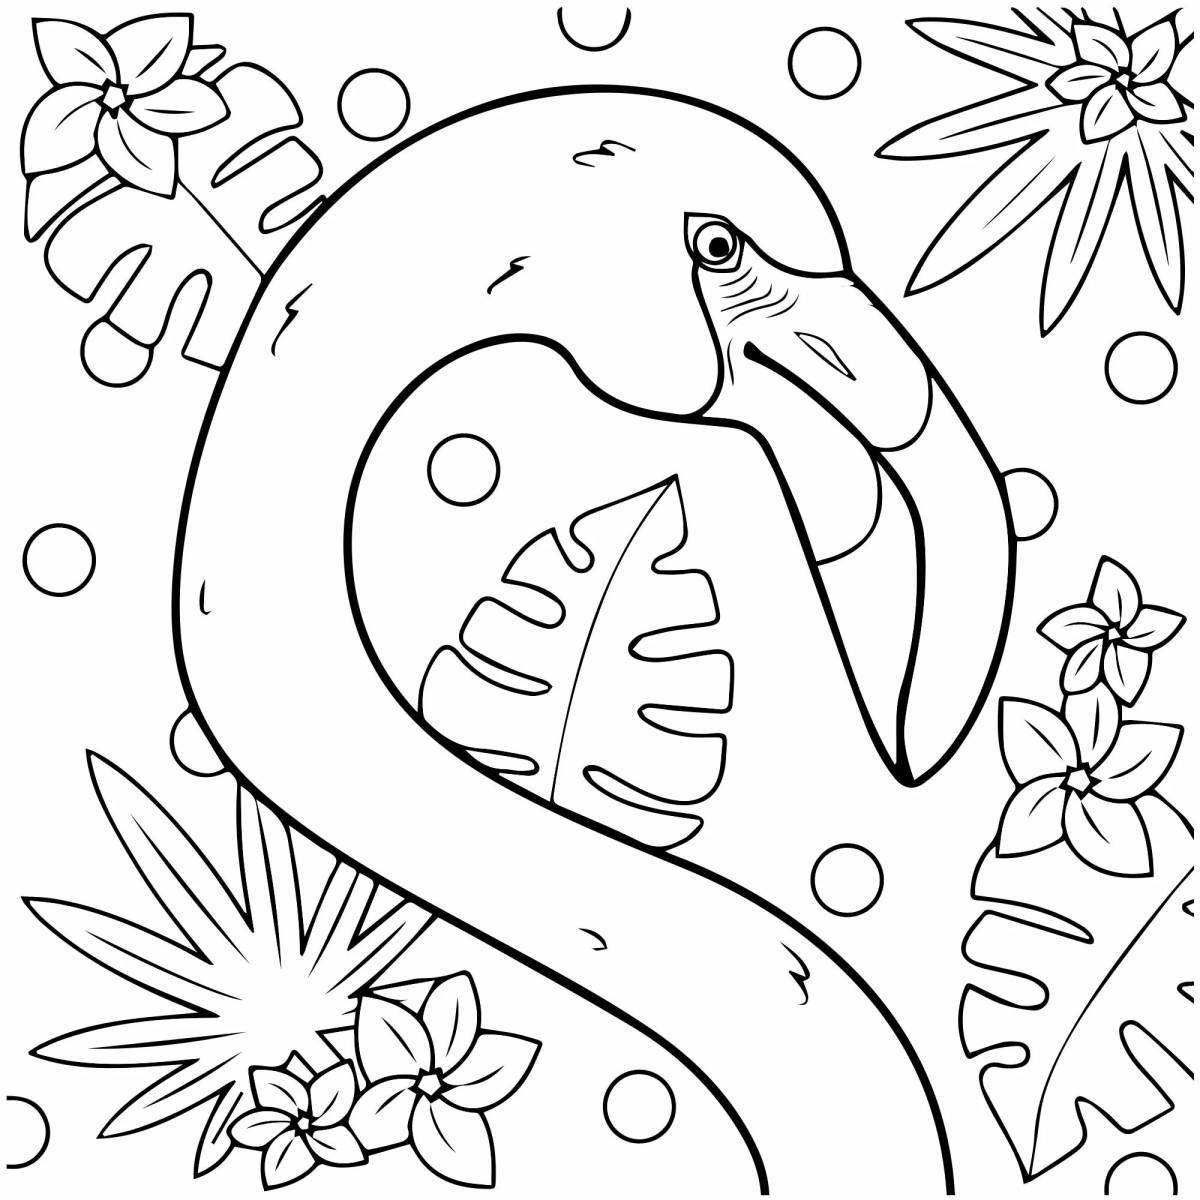 Colourful flamingo coloring for girls